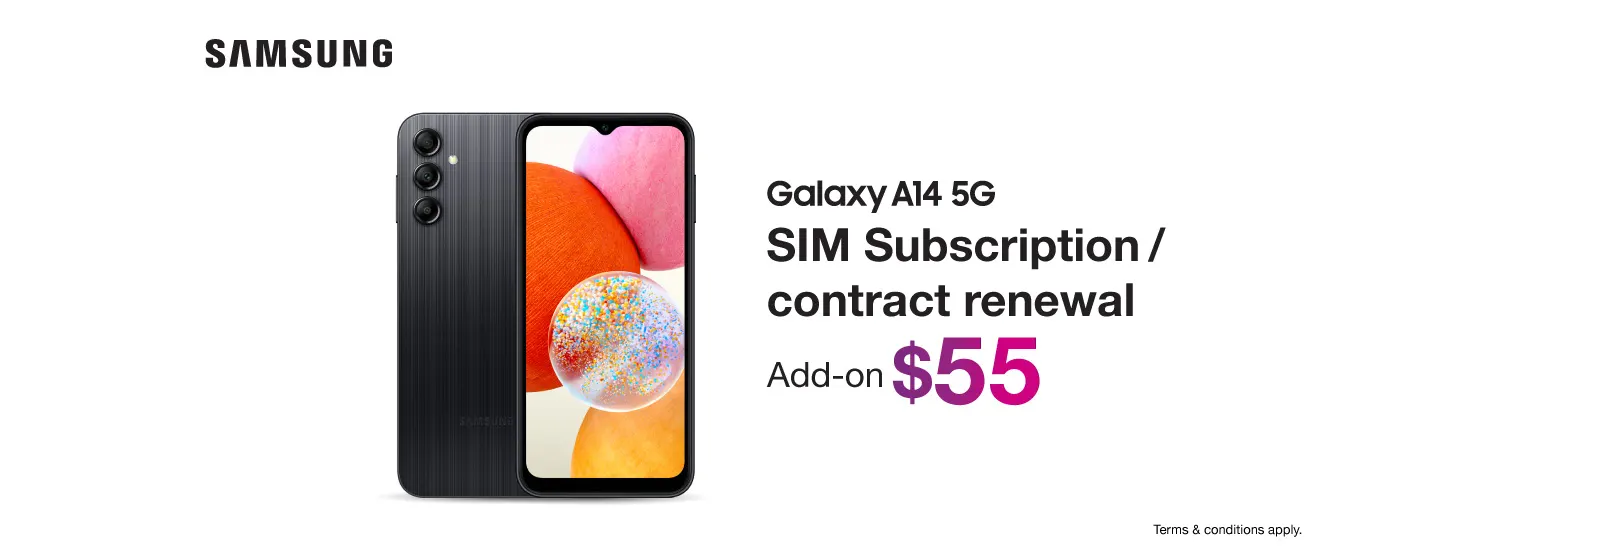 $55/mth Add-on Offer upon SIM Subscription / contract renewal. Free delivery!